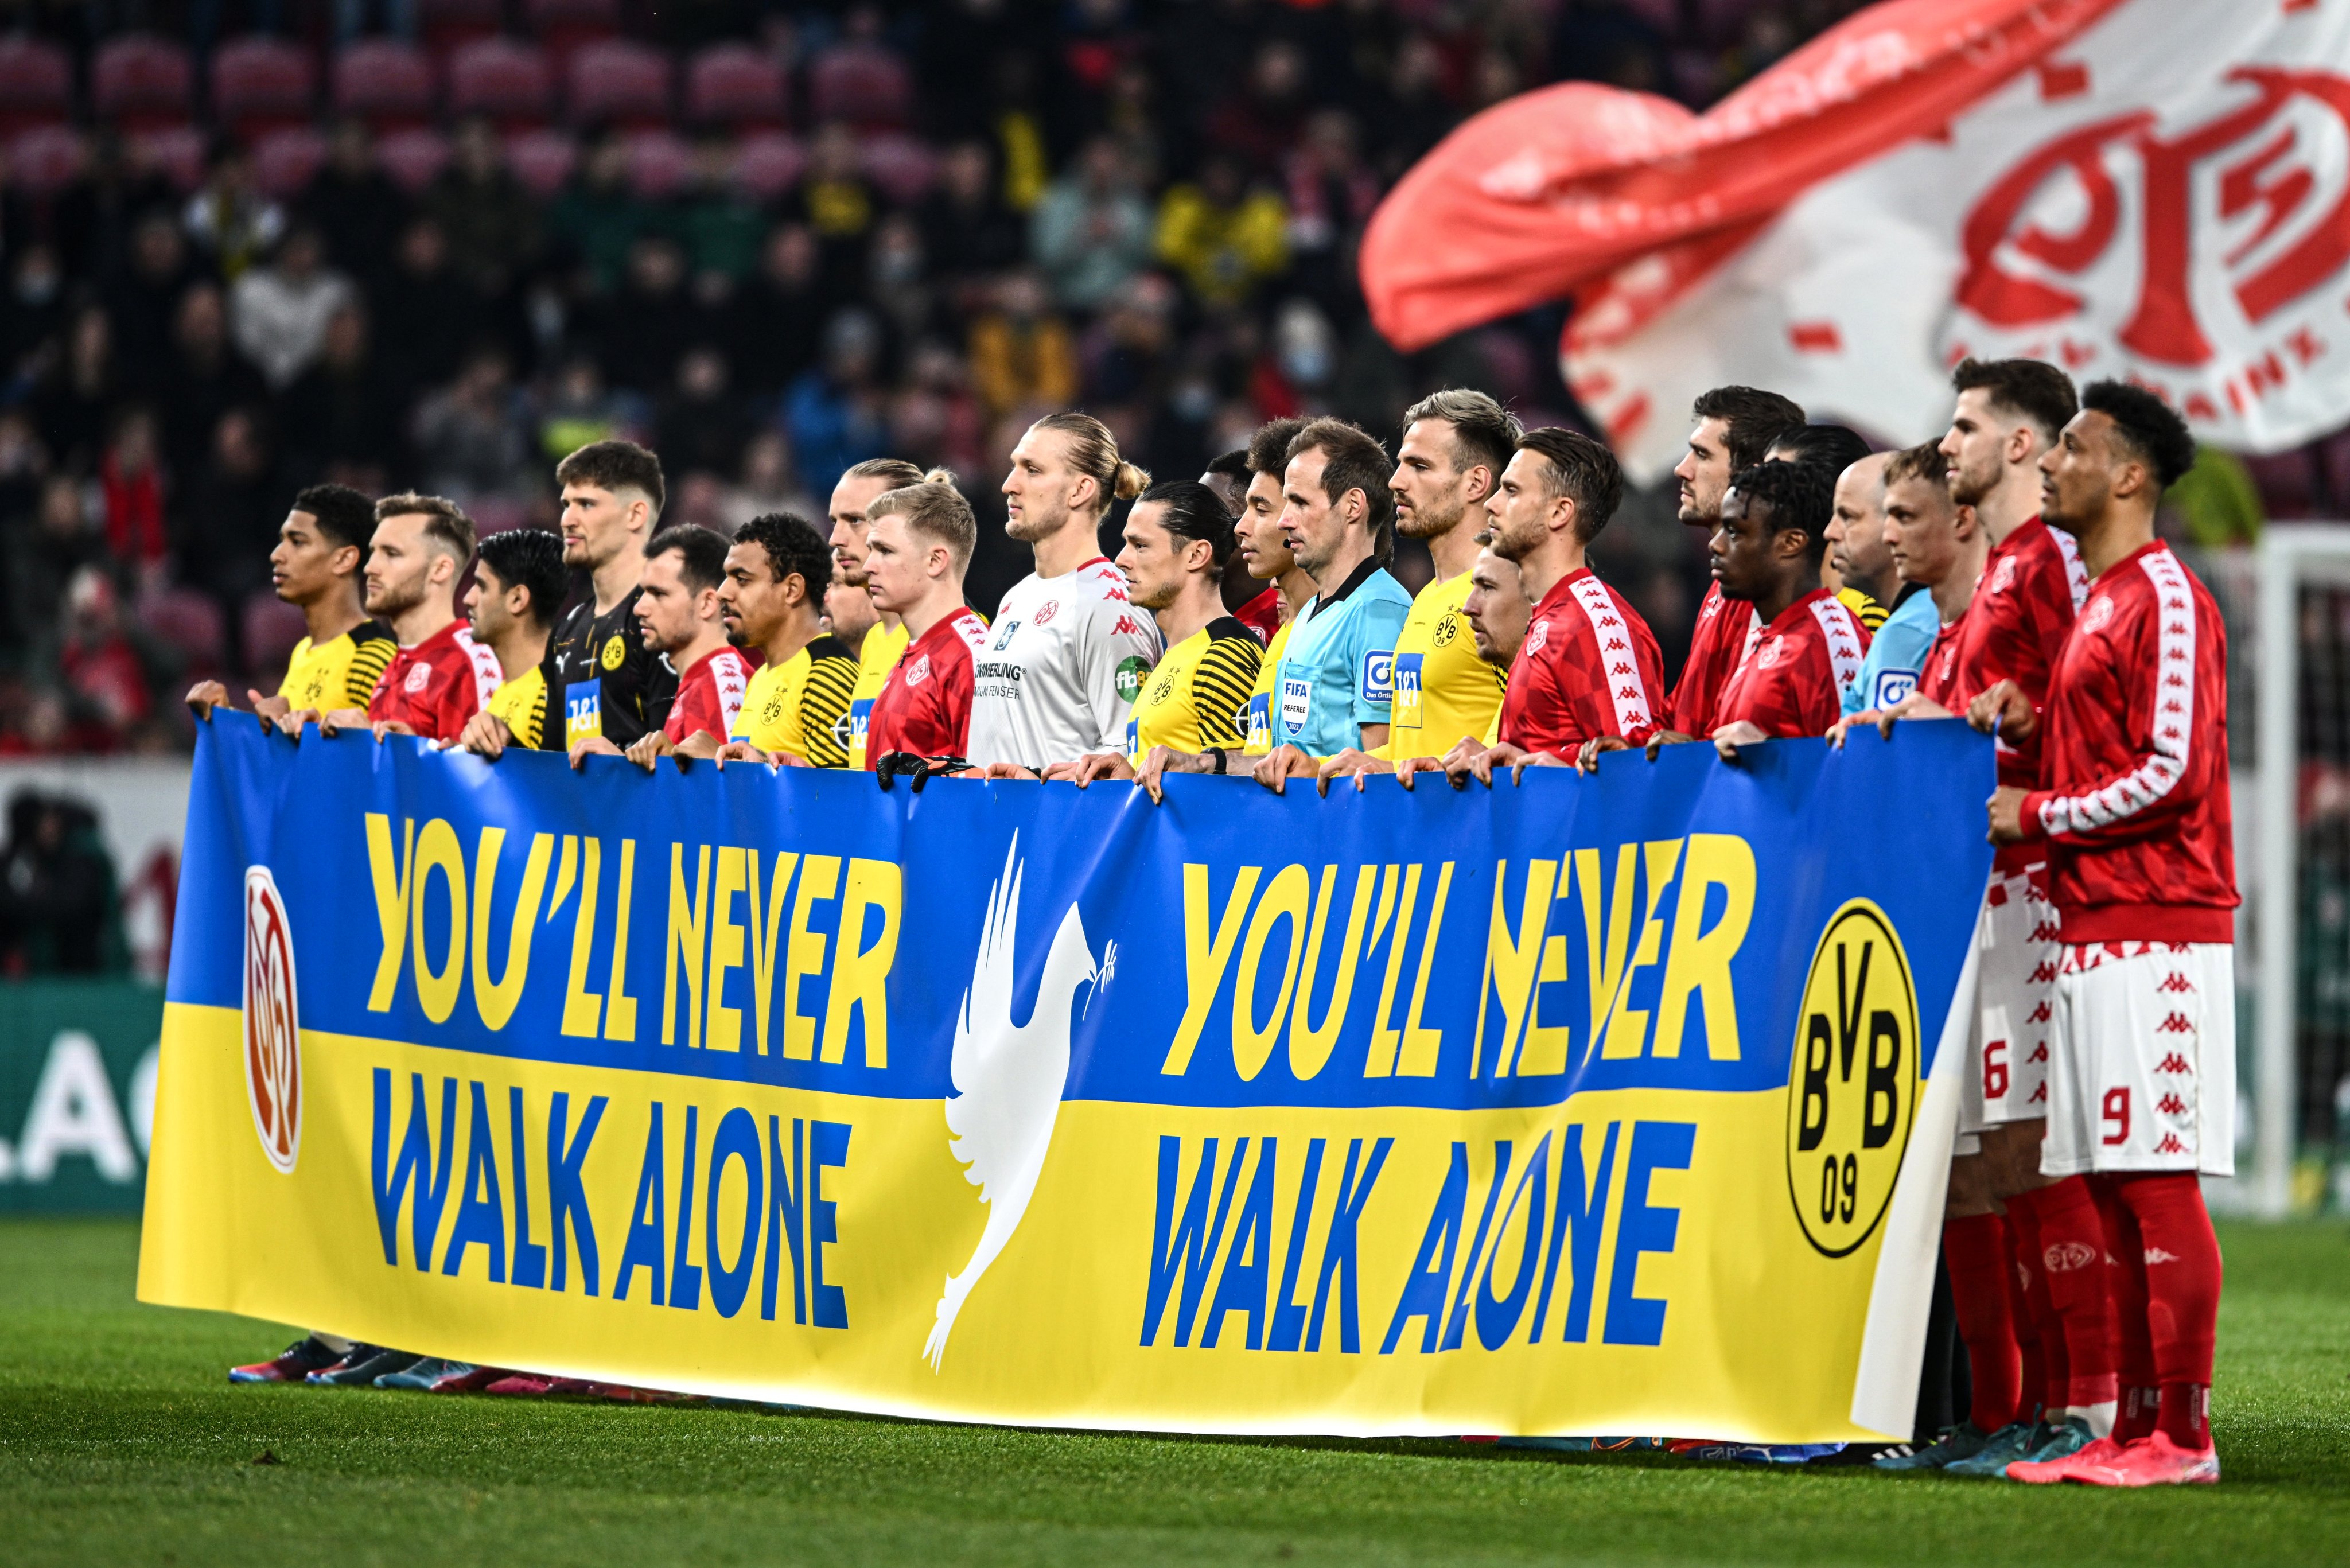 B/R Football on Twitter: "Dortmund and Mainz held up "You'll Never Walk  Alone" signs in support of Ukraine ahead of their match today  https://t.co/7E8s2N7HJw" / Twitter